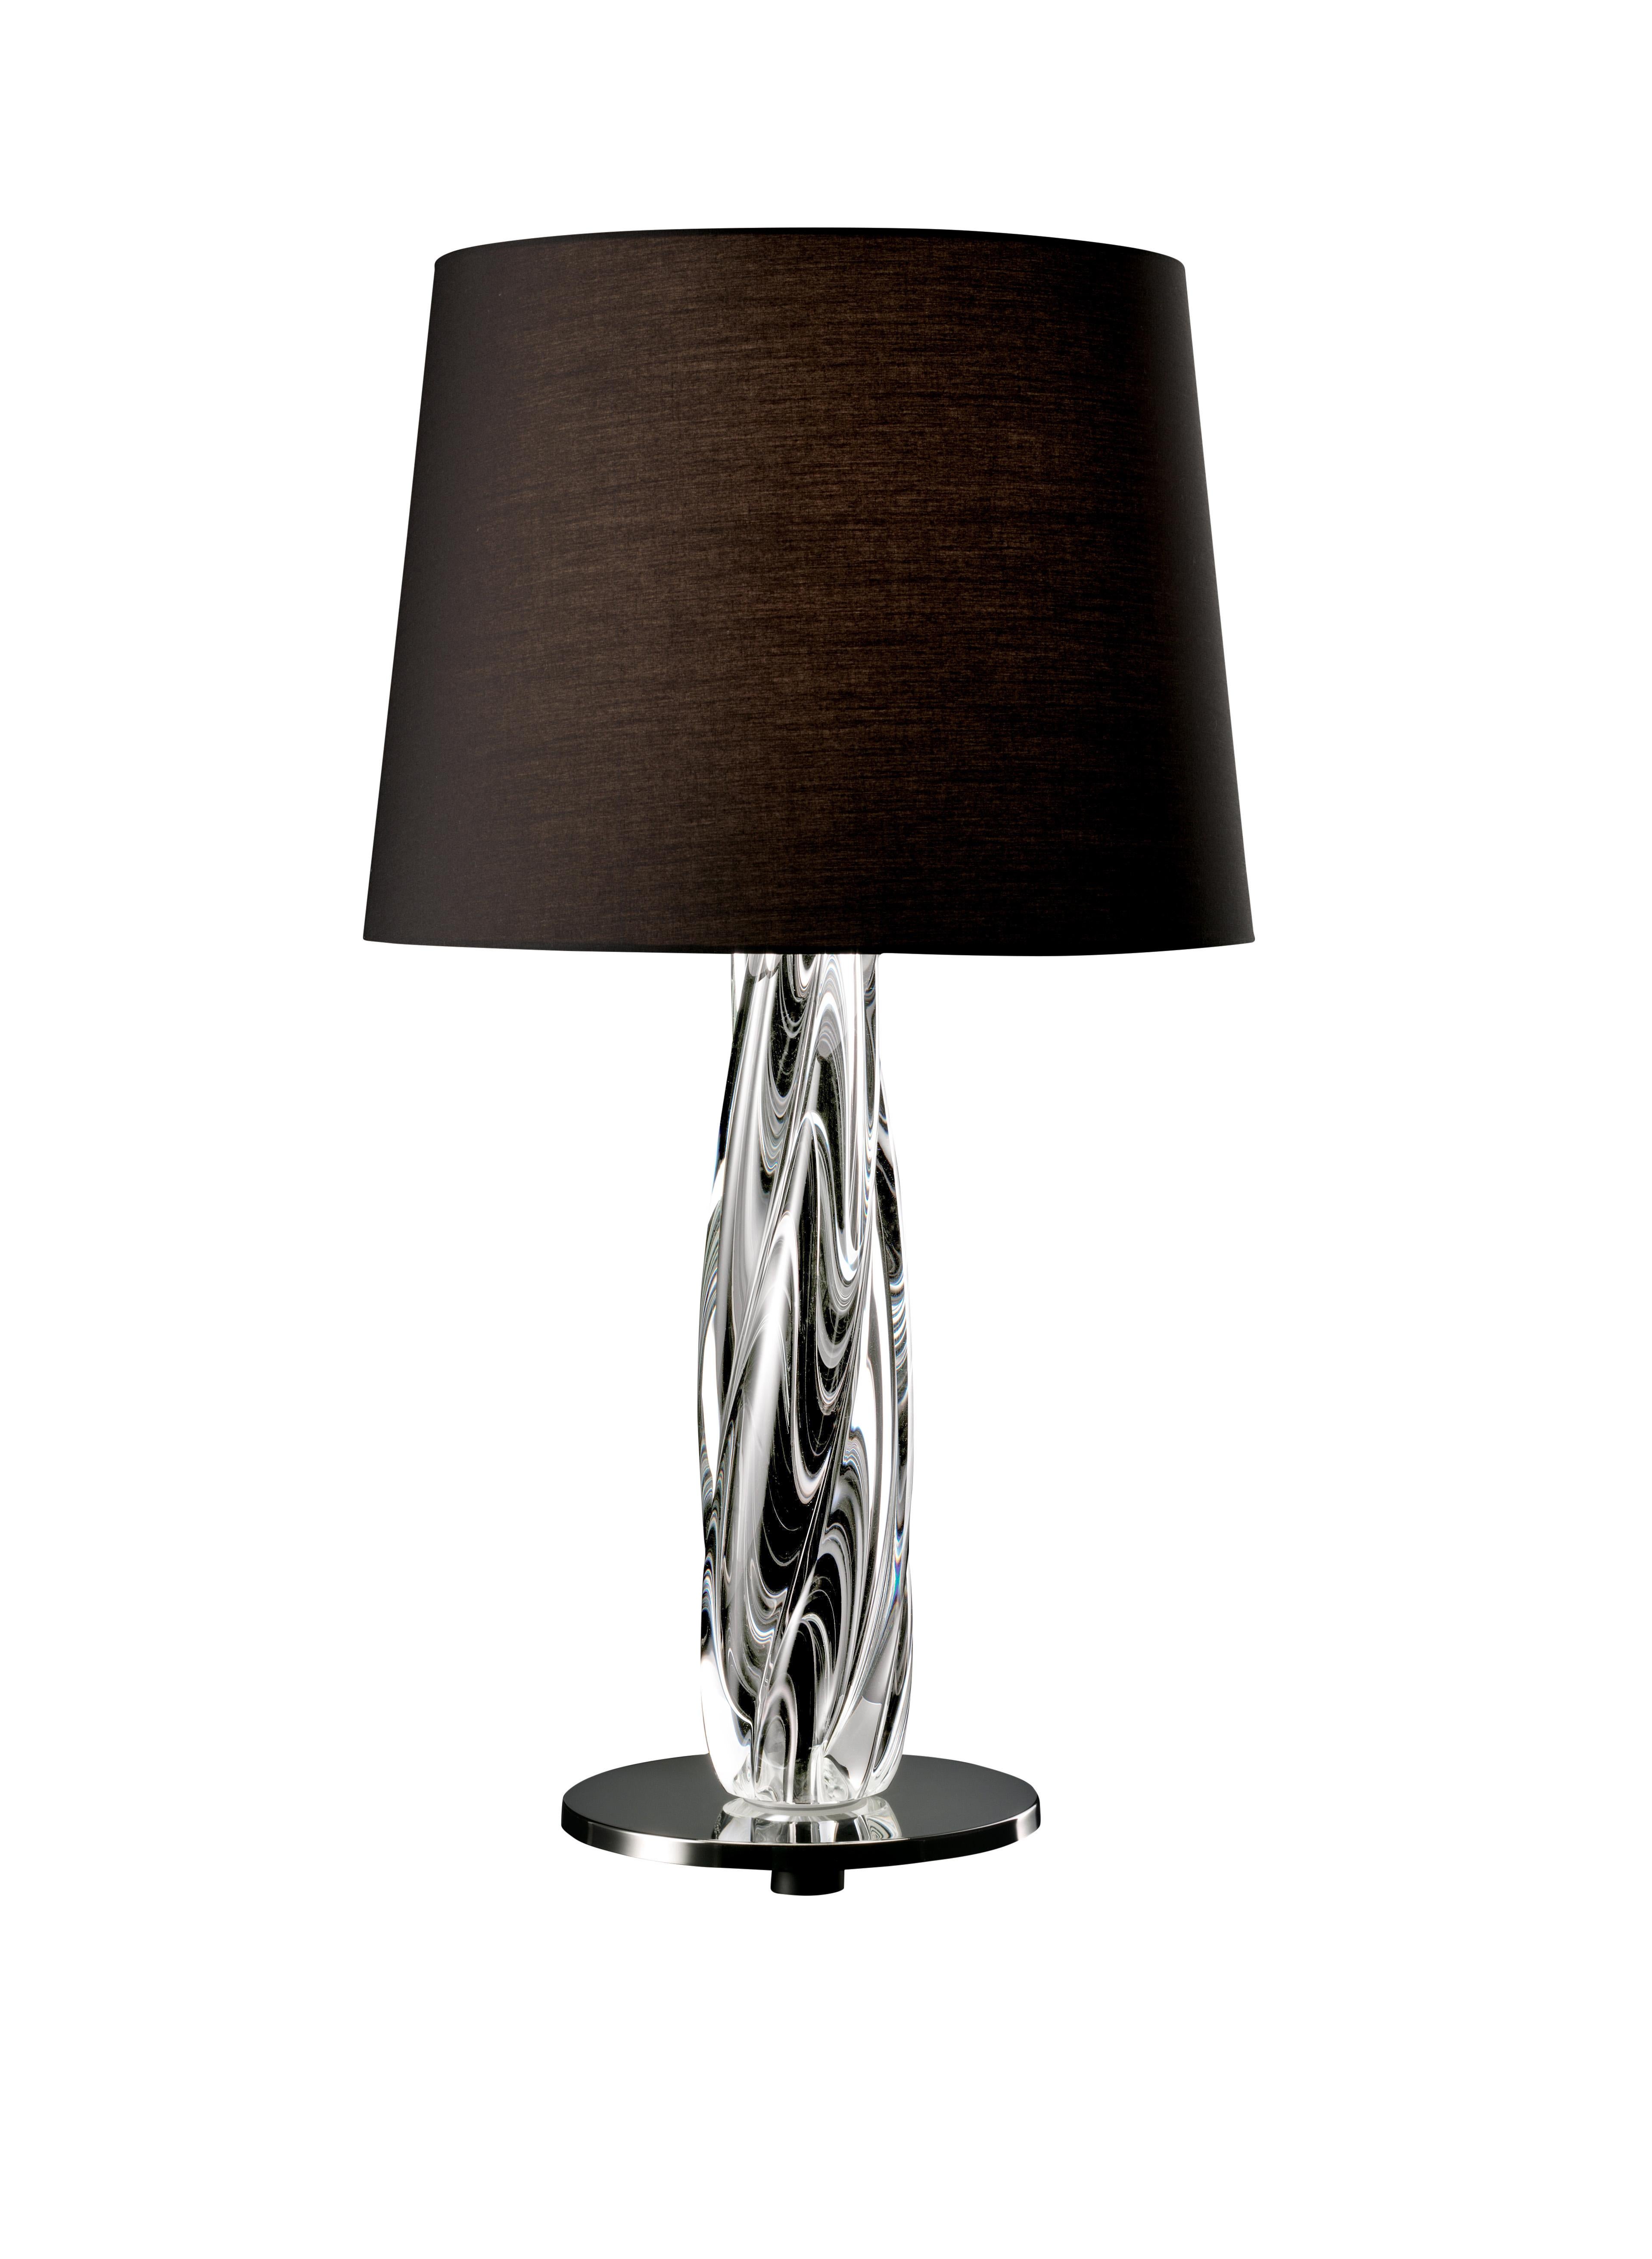 Twins 7224 Table Lamp in Glass with Black Shade and Chrome, by Barovier&Toso